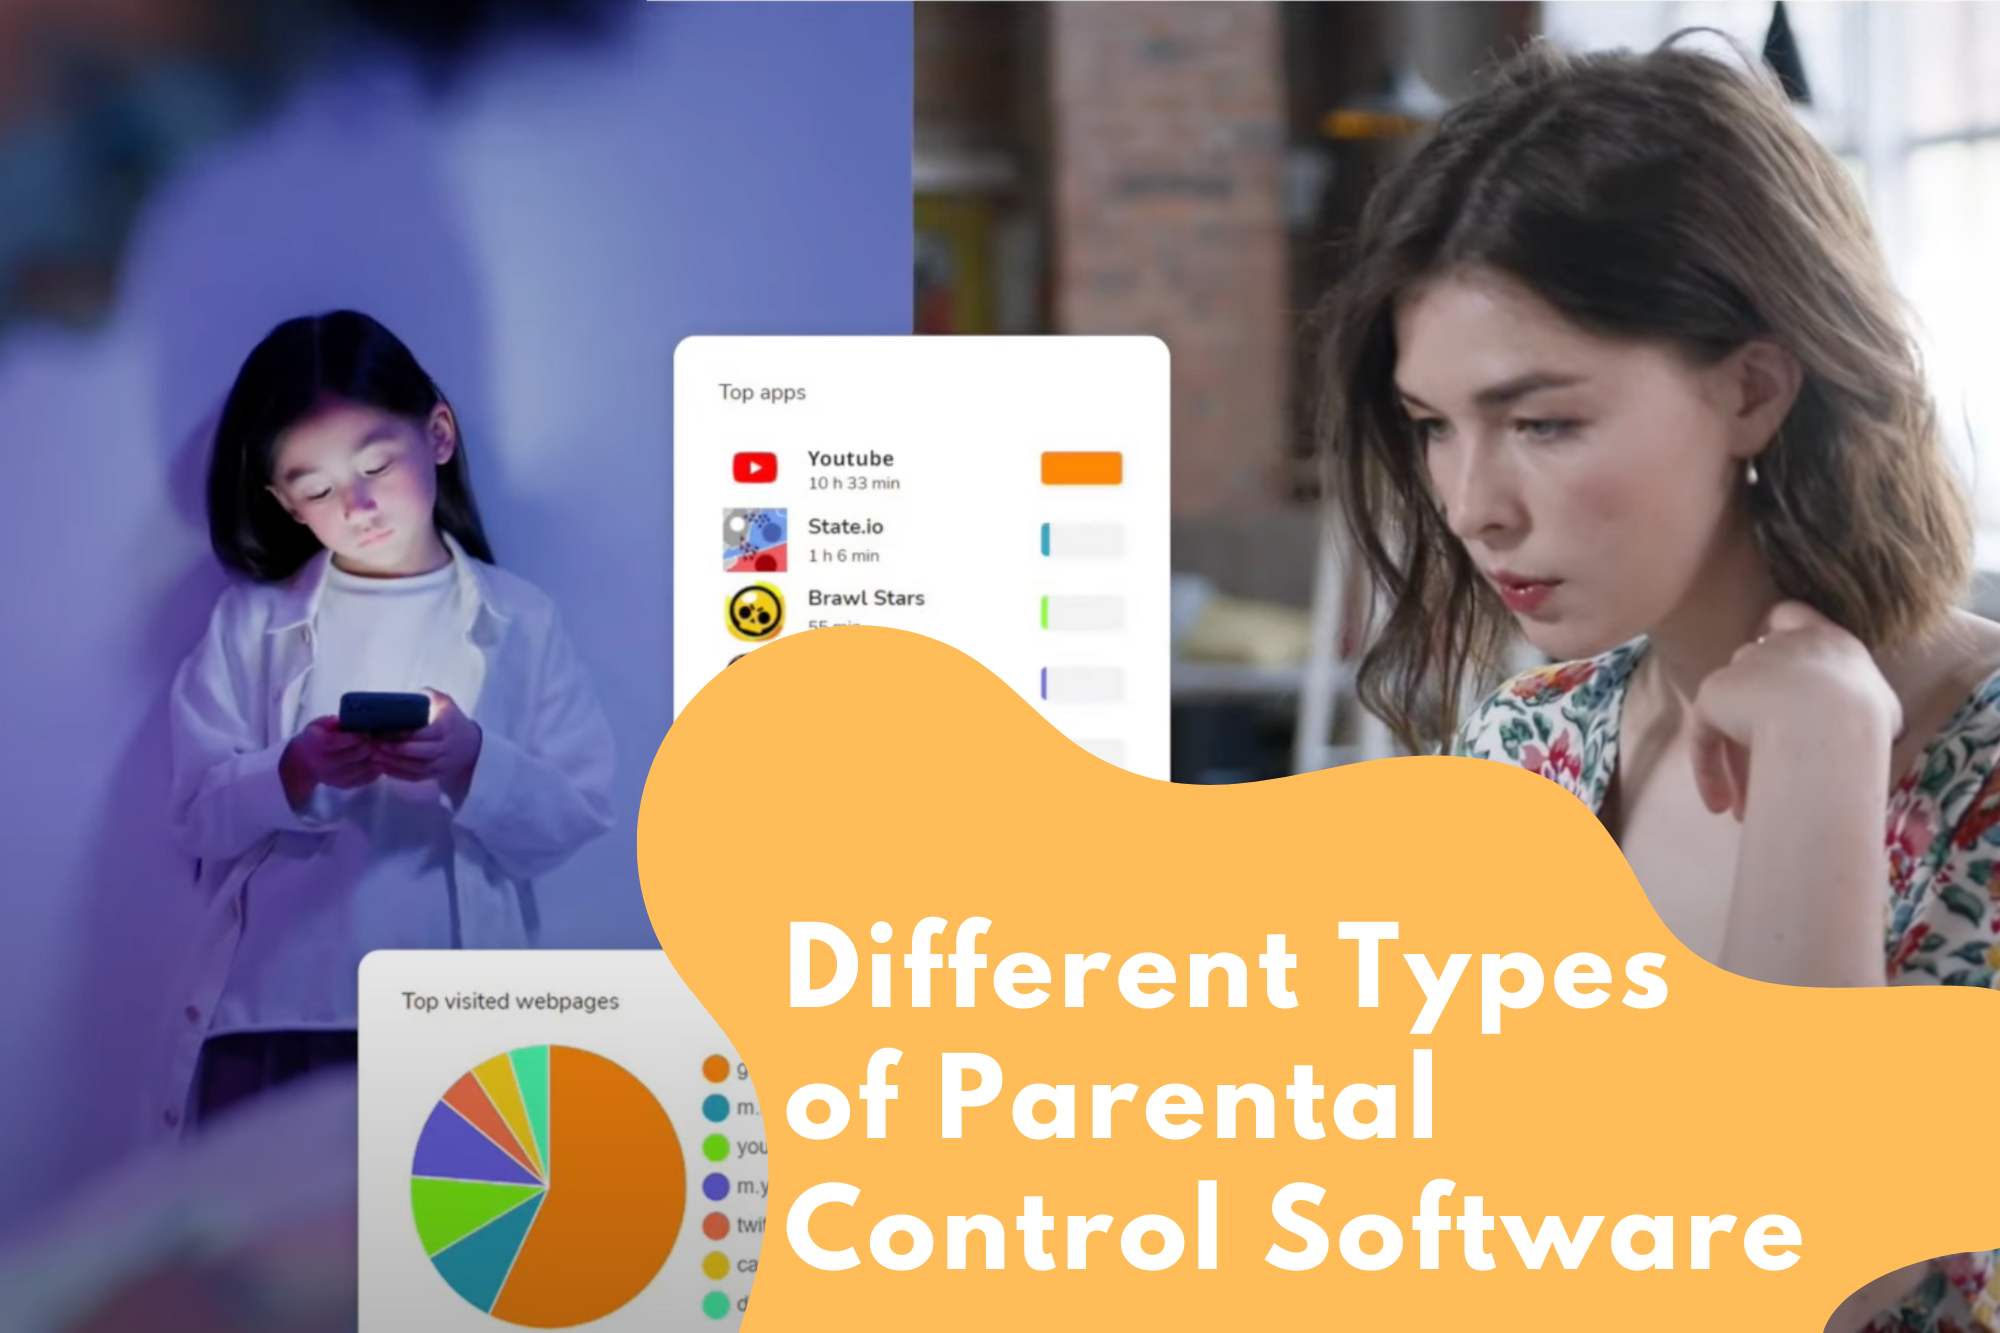 Understanding the Different Types of Parental Control Software